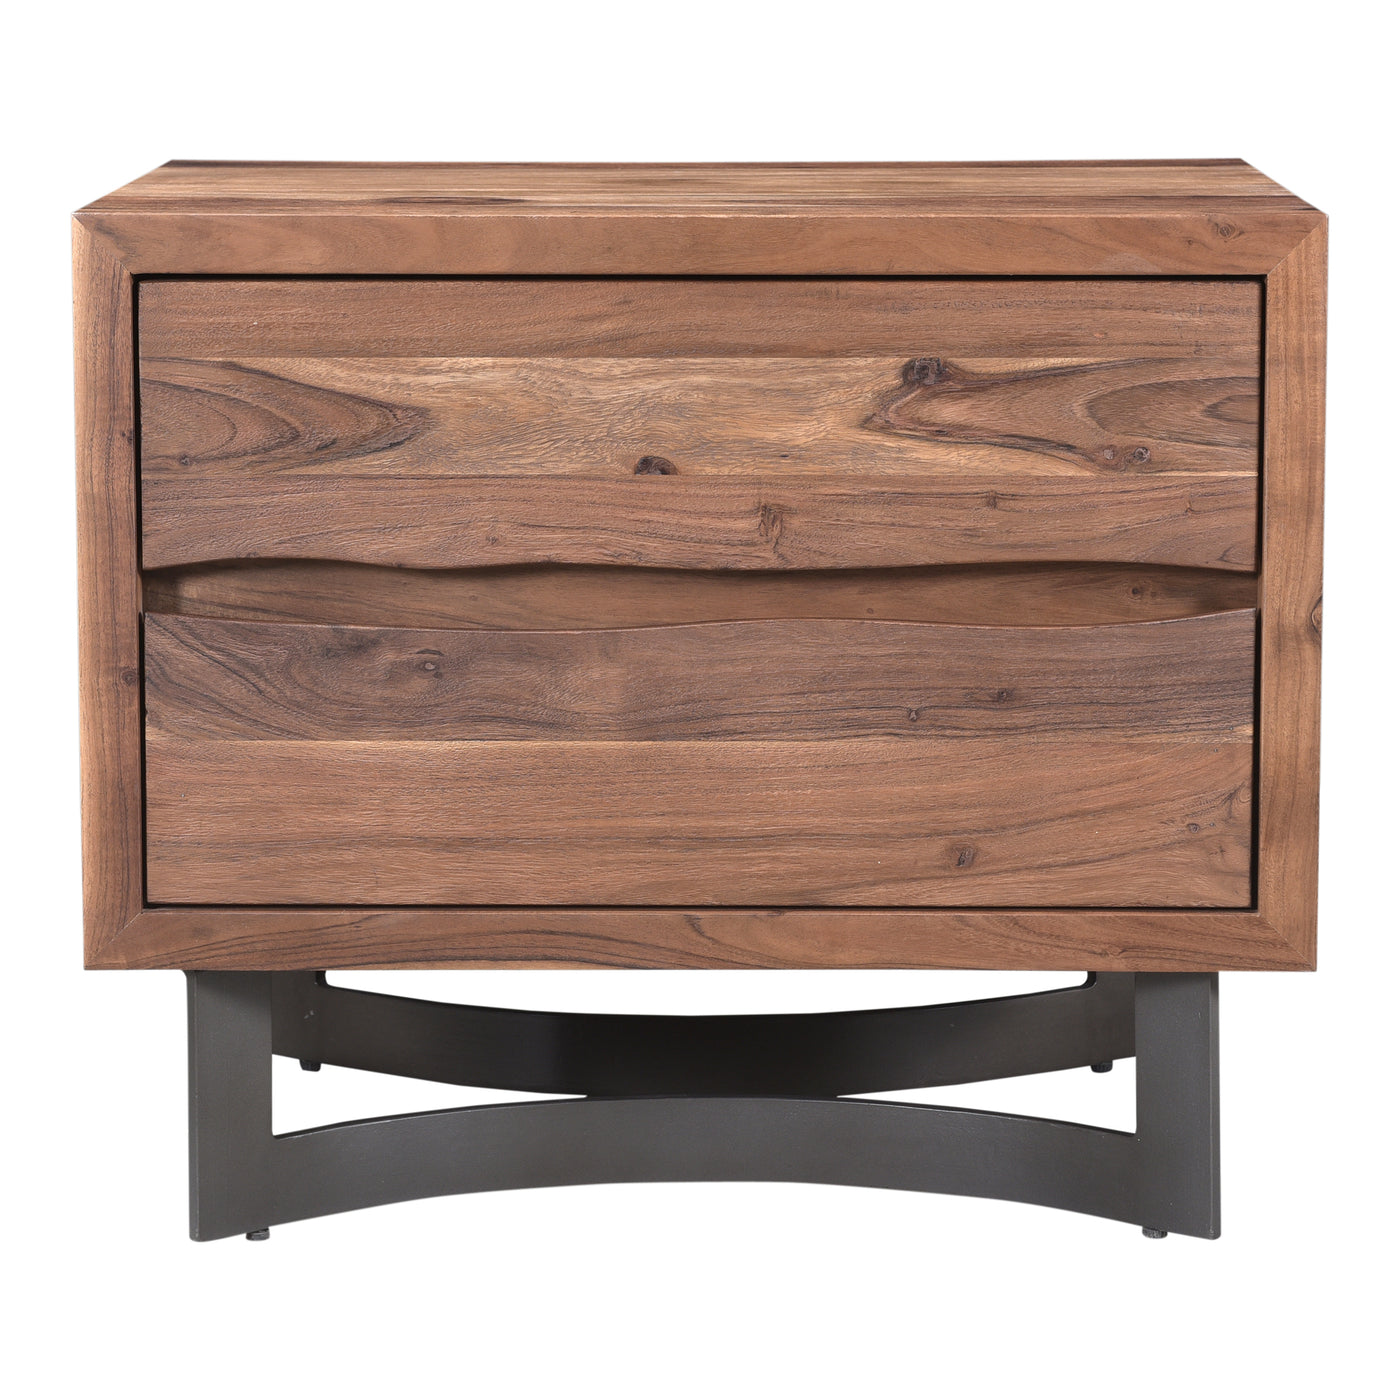 The Bent collection puts nature’s craft front and center. Made of beautiful solid acacia wood, rustic live edge detailing ...